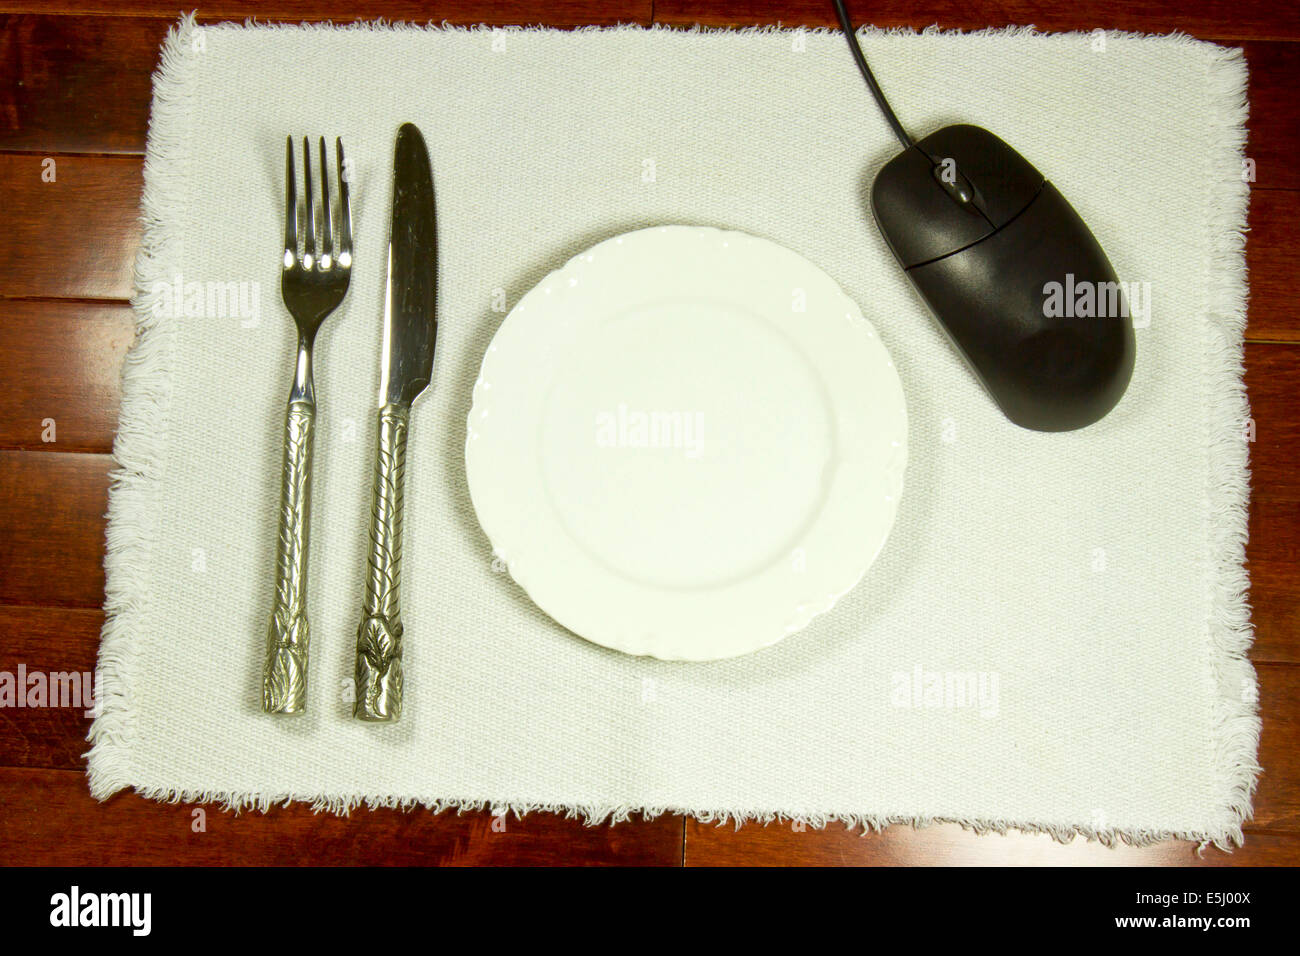 Place mat with knife and fork with tablet showing plate representing internet restaurant review, ordering or reservations Stock Photo